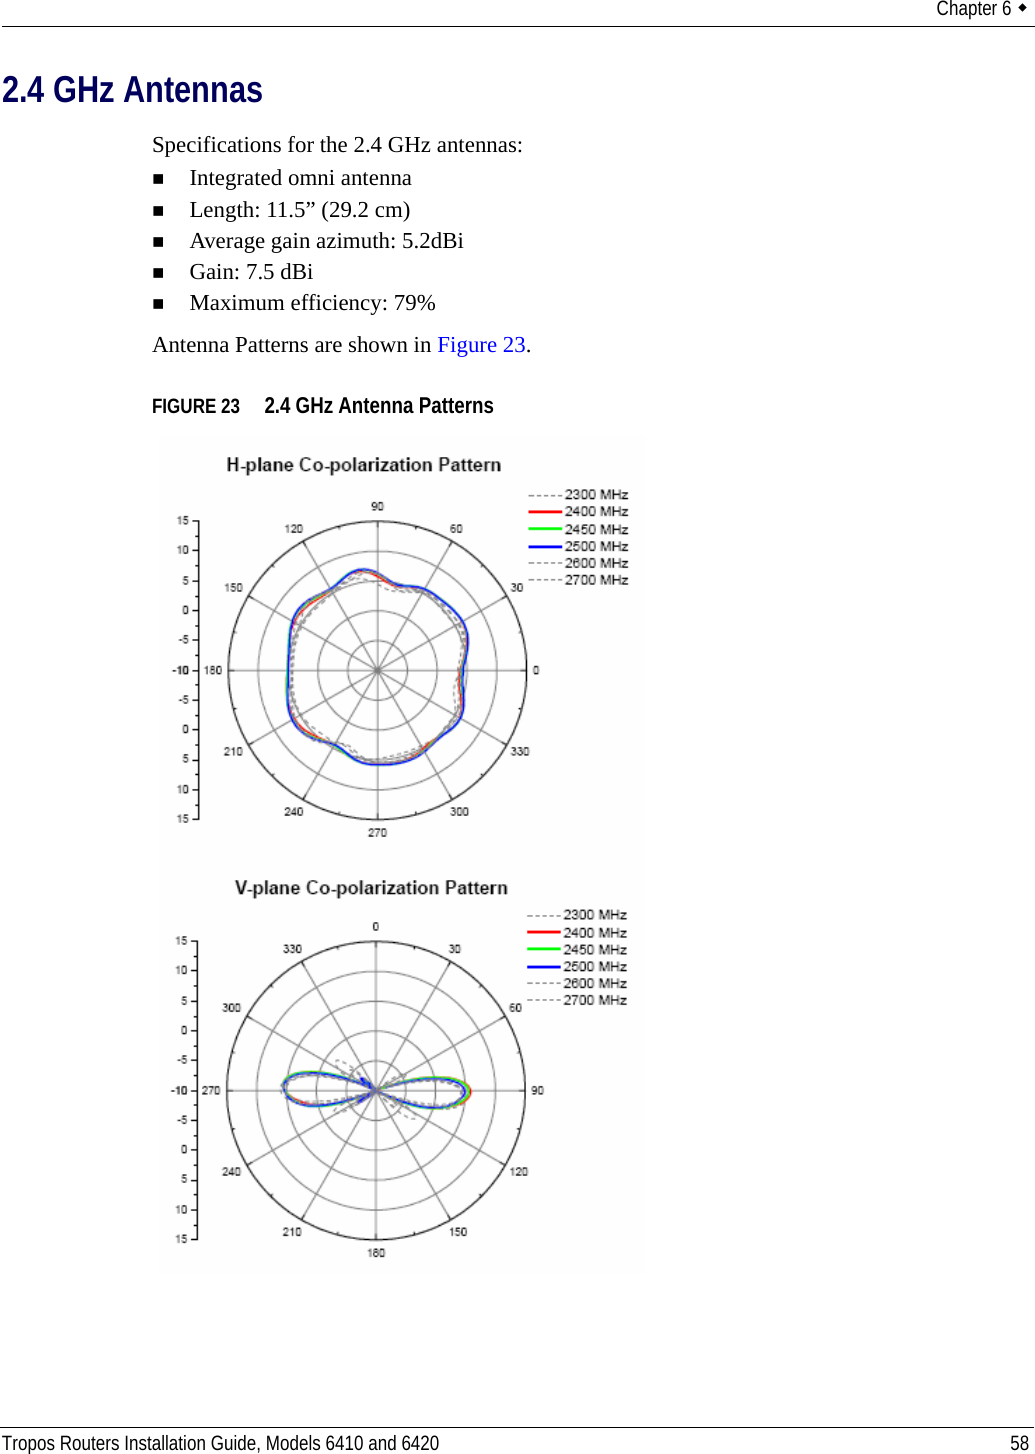 Chapter 6  Tropos Routers Installation Guide, Models 6410 and 6420 582.4 GHz AntennasSpecifications for the 2.4 GHz antennas:Integrated omni antennaLength: 11.5” (29.2 cm)Average gain azimuth: 5.2dBiGain: 7.5 dBiMaximum efficiency: 79% Antenna Patterns are shown in Figure 23.FIGURE 23   2.4 GHz Antenna Patterns